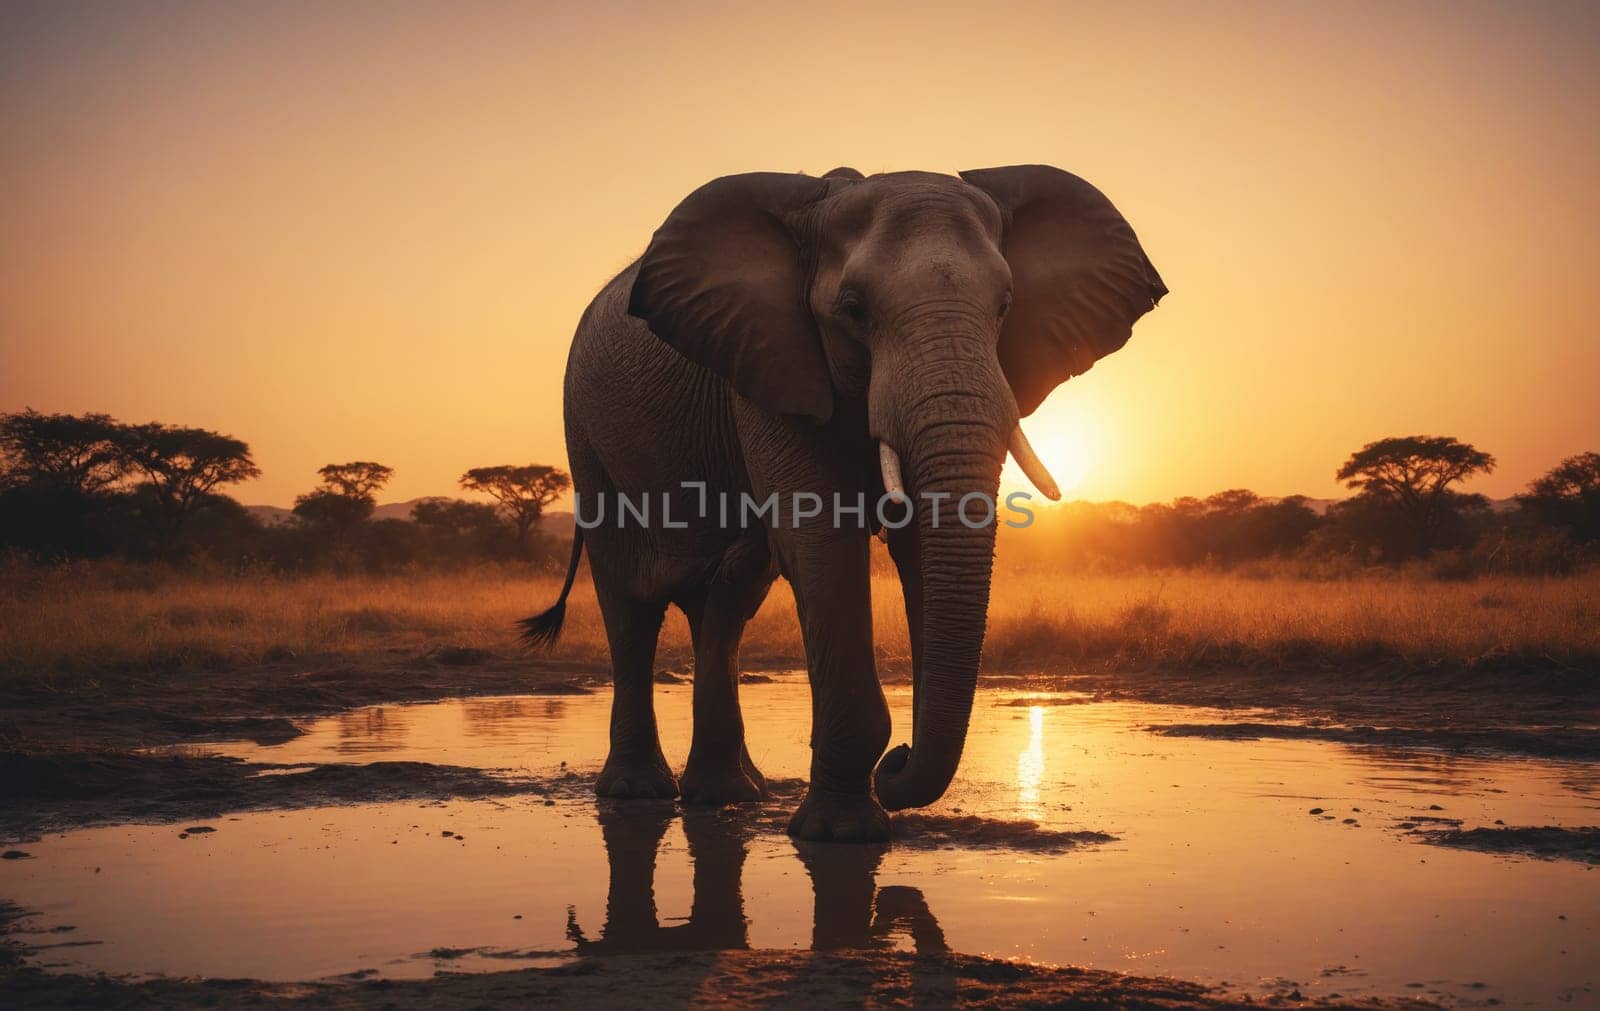 An Indian elephant, a terrestrial animal, stands in a puddle of water at sunset in a natural landscape. The sky is painted with clouds as this working animal enjoys the liquid refreshment